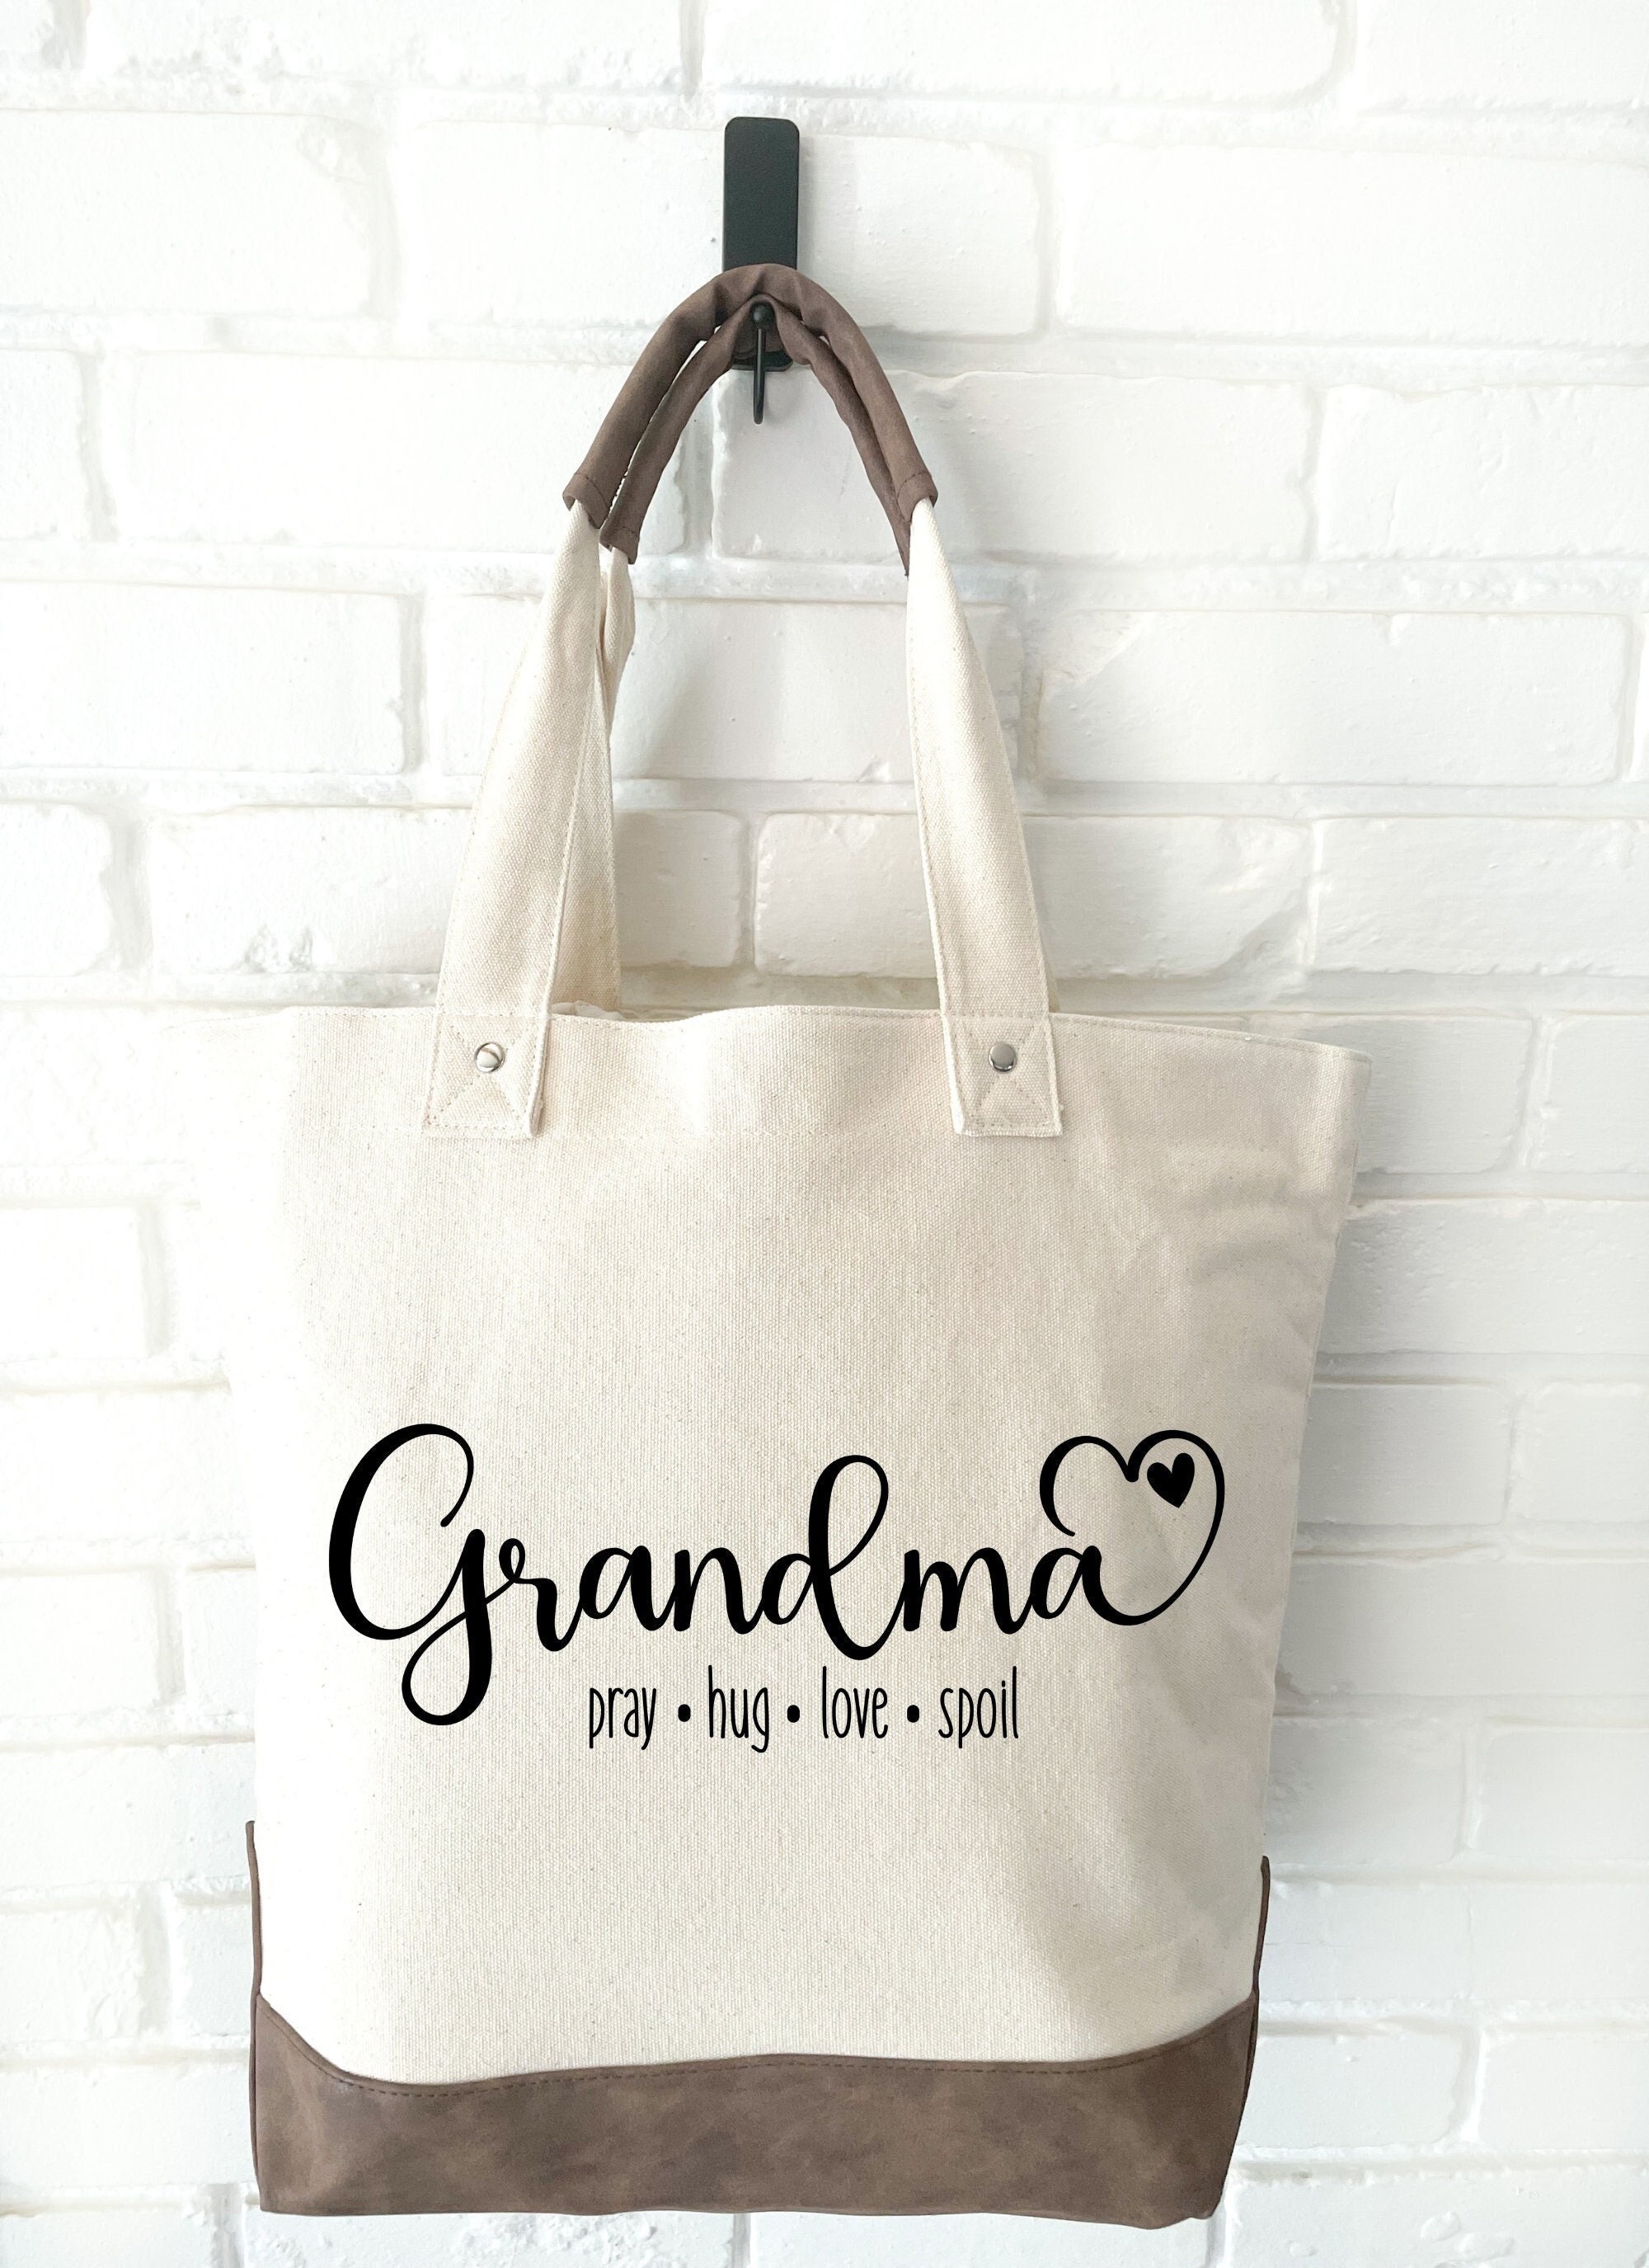 Personalized Knitting Tote Bag Custom Name Project Bag for Crochet Storage  Knitting Gift Idea for Knitter Grandma Gift Mother's Day Gift 